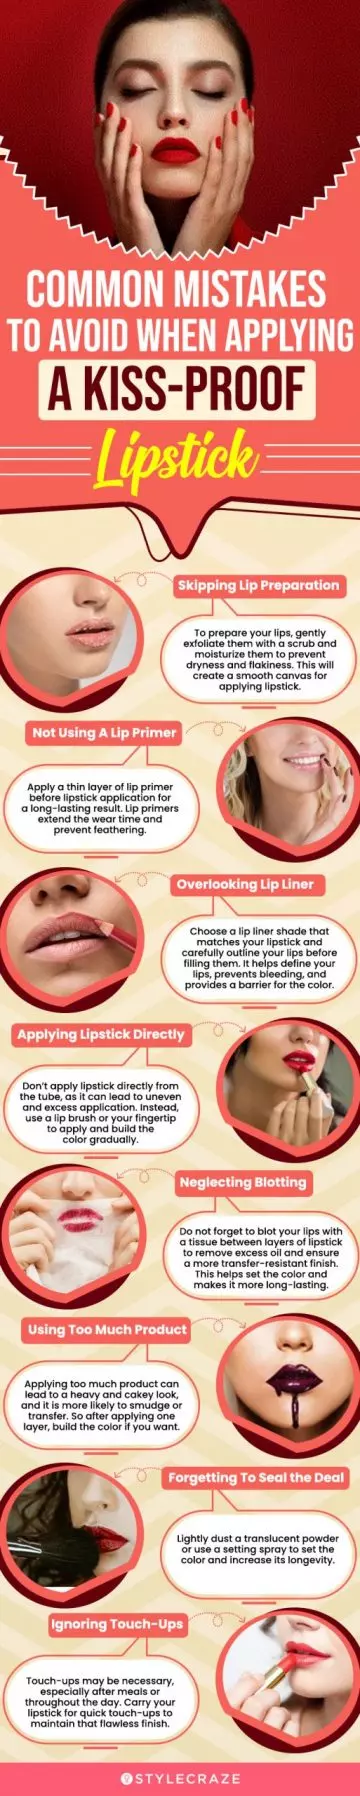 Common Mistakes to Avoid When Applying Kiss-Proof Lipstick (infographic)